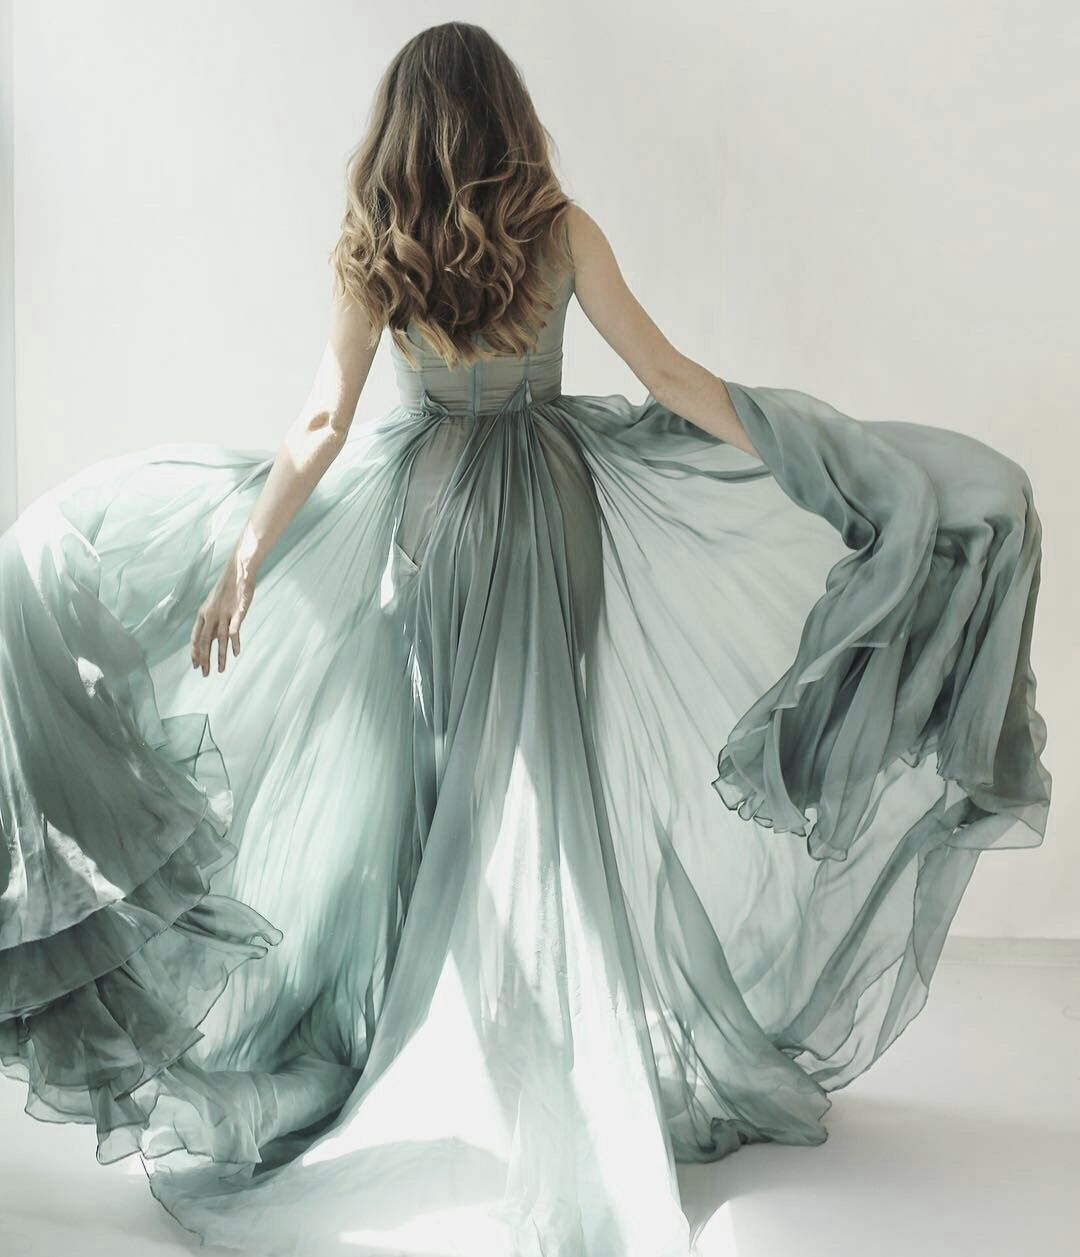 Dip-dyed, colorful wedding dresses are the new bridal trend